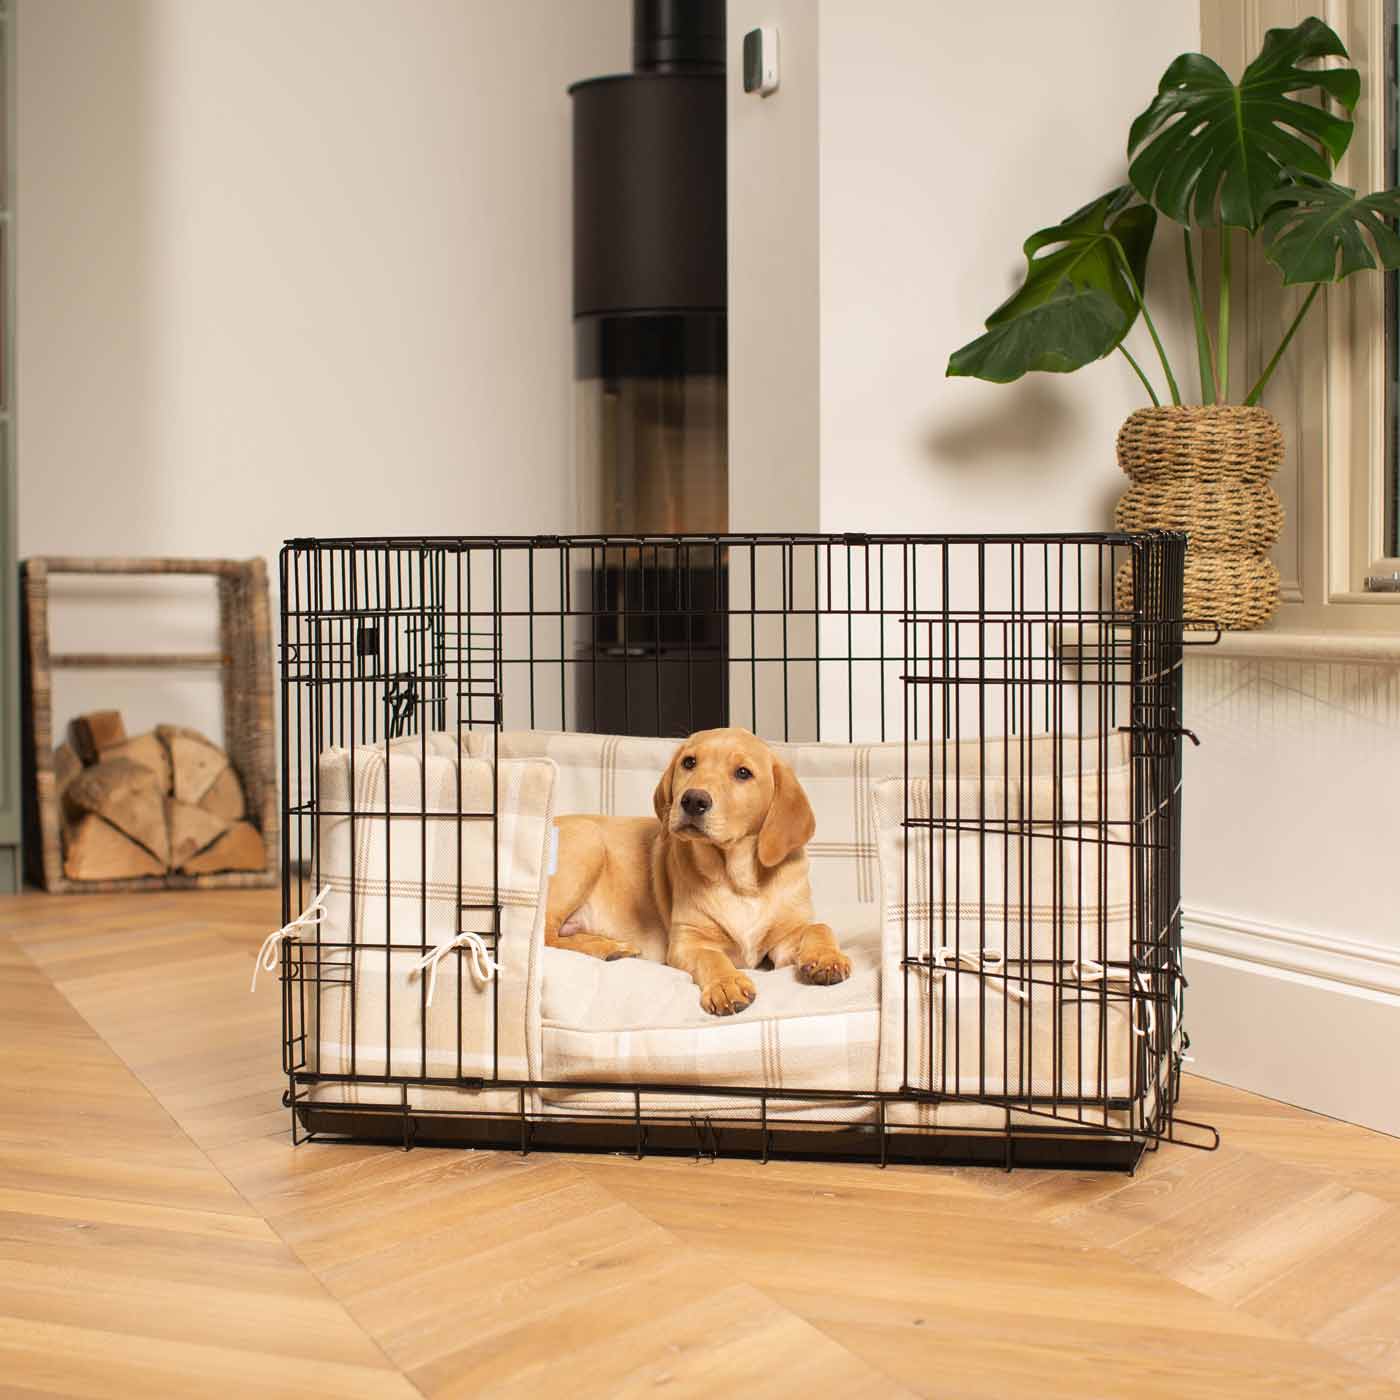 Dog Cage Bumper in Balmoral Natural Tweed by Lords & Labradors